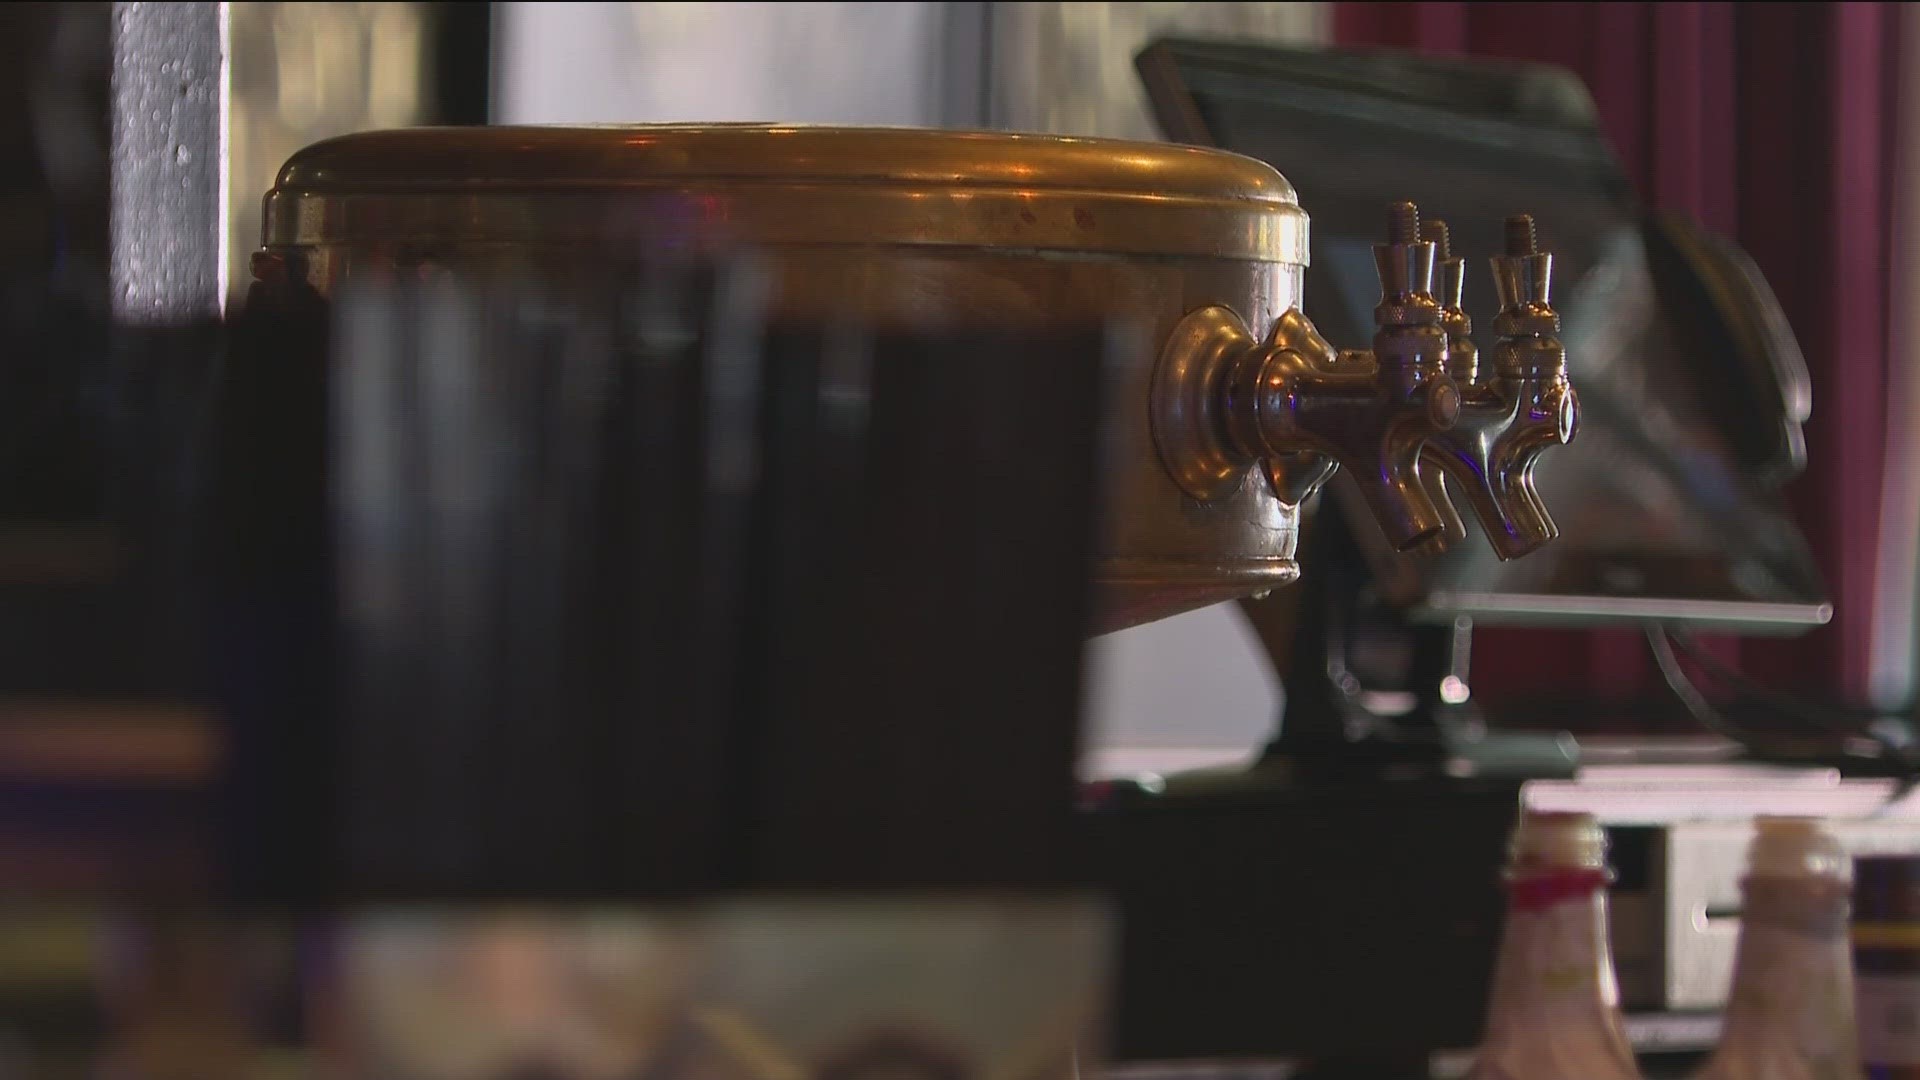 Senate Bill 1120 would restrict the ability to resell a new liquor license after July 1, 2023. A license administered before the date could be sold one more time.